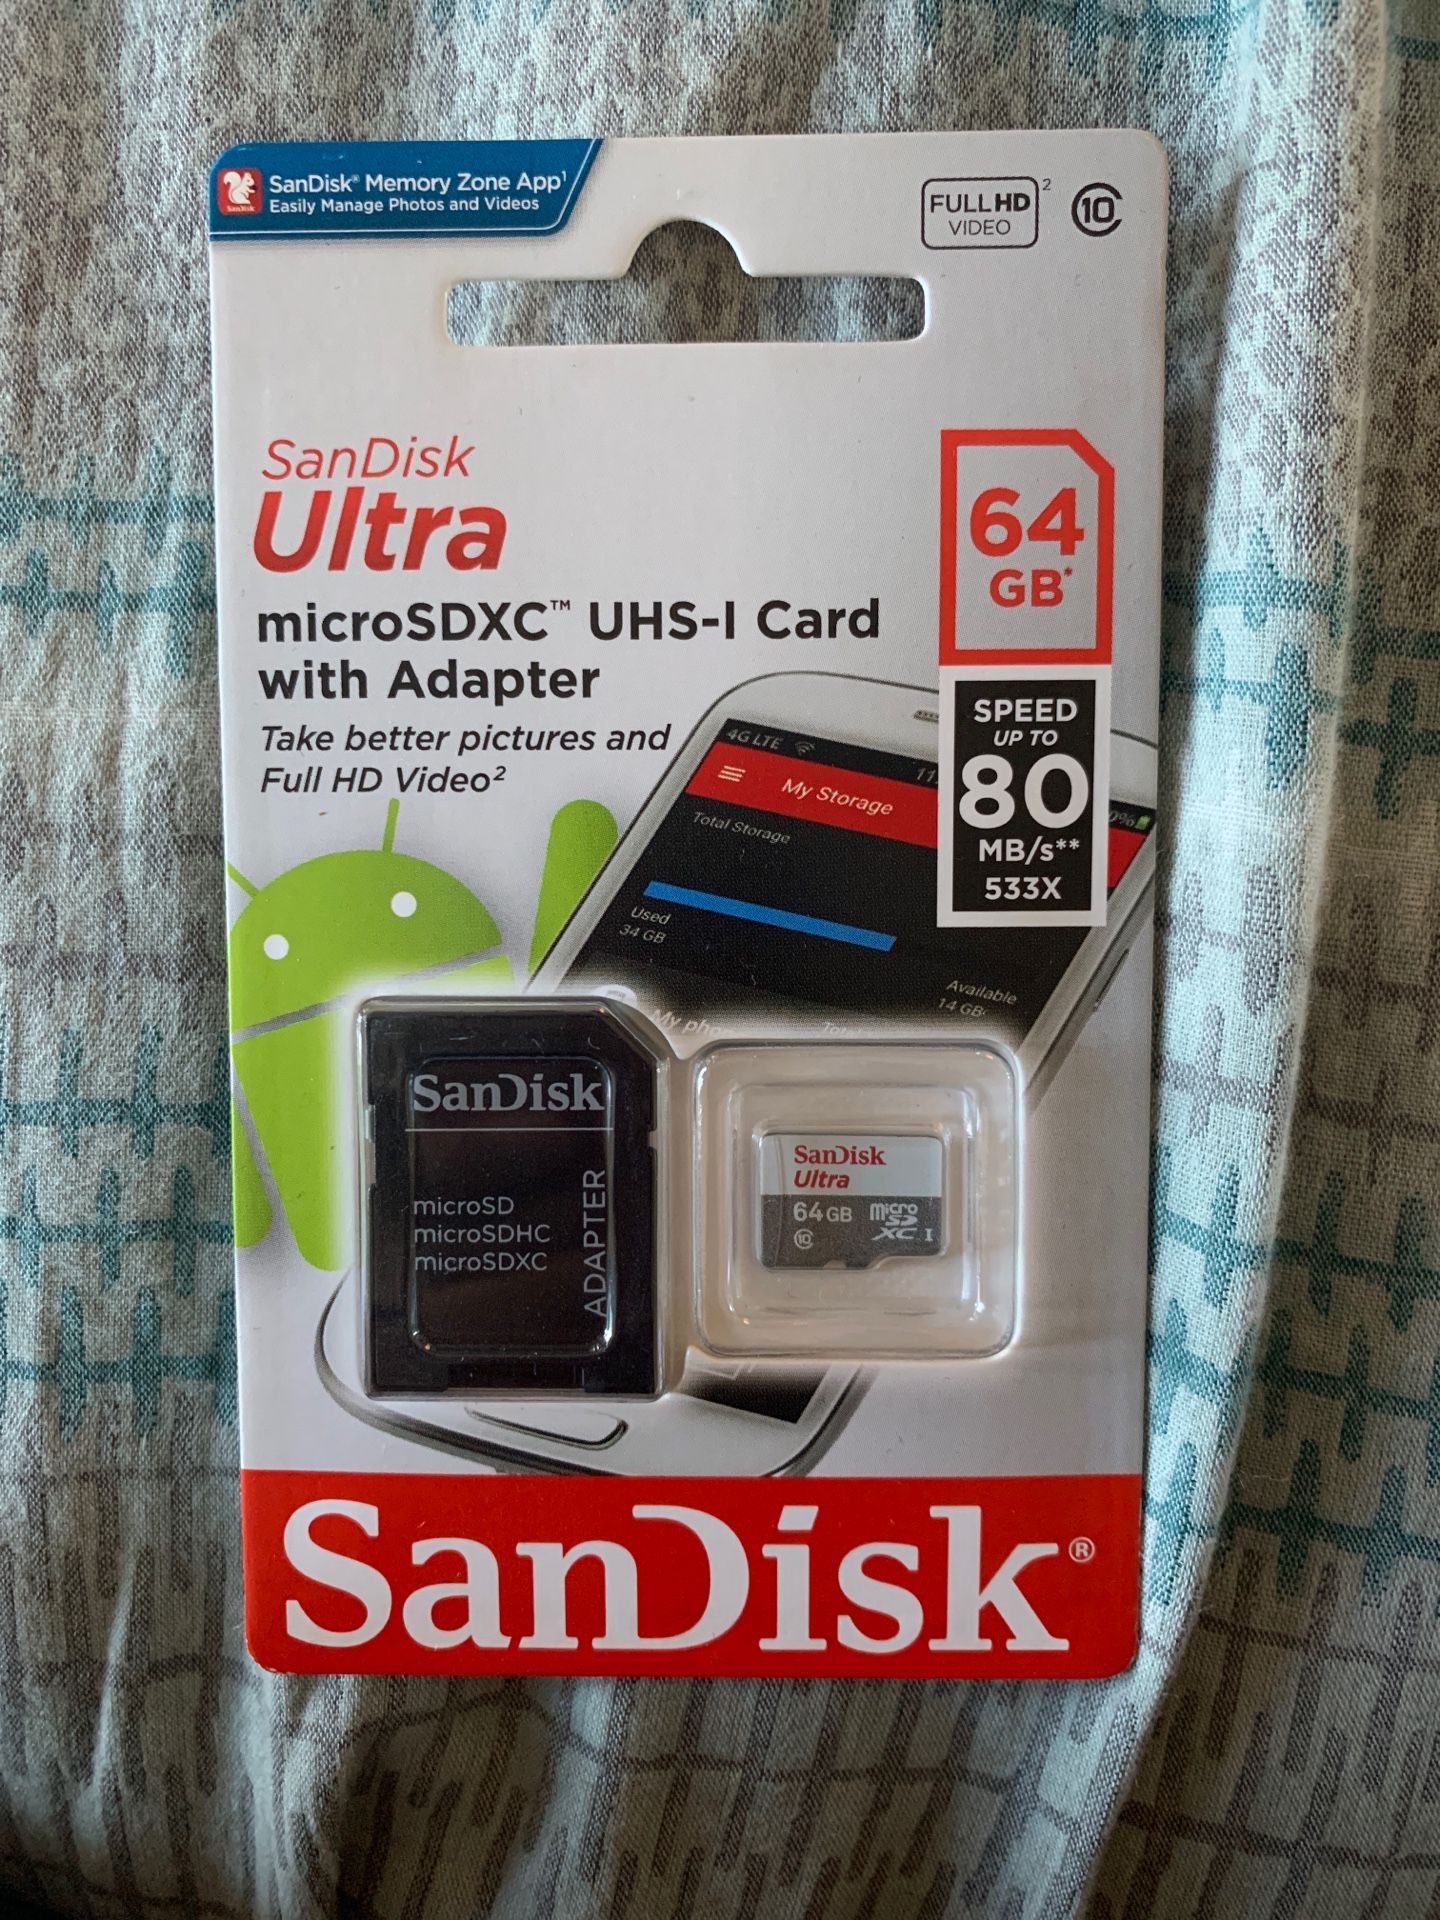 SanDisk Ultra micro SDXC UHS-I Card with Adapter 64GB